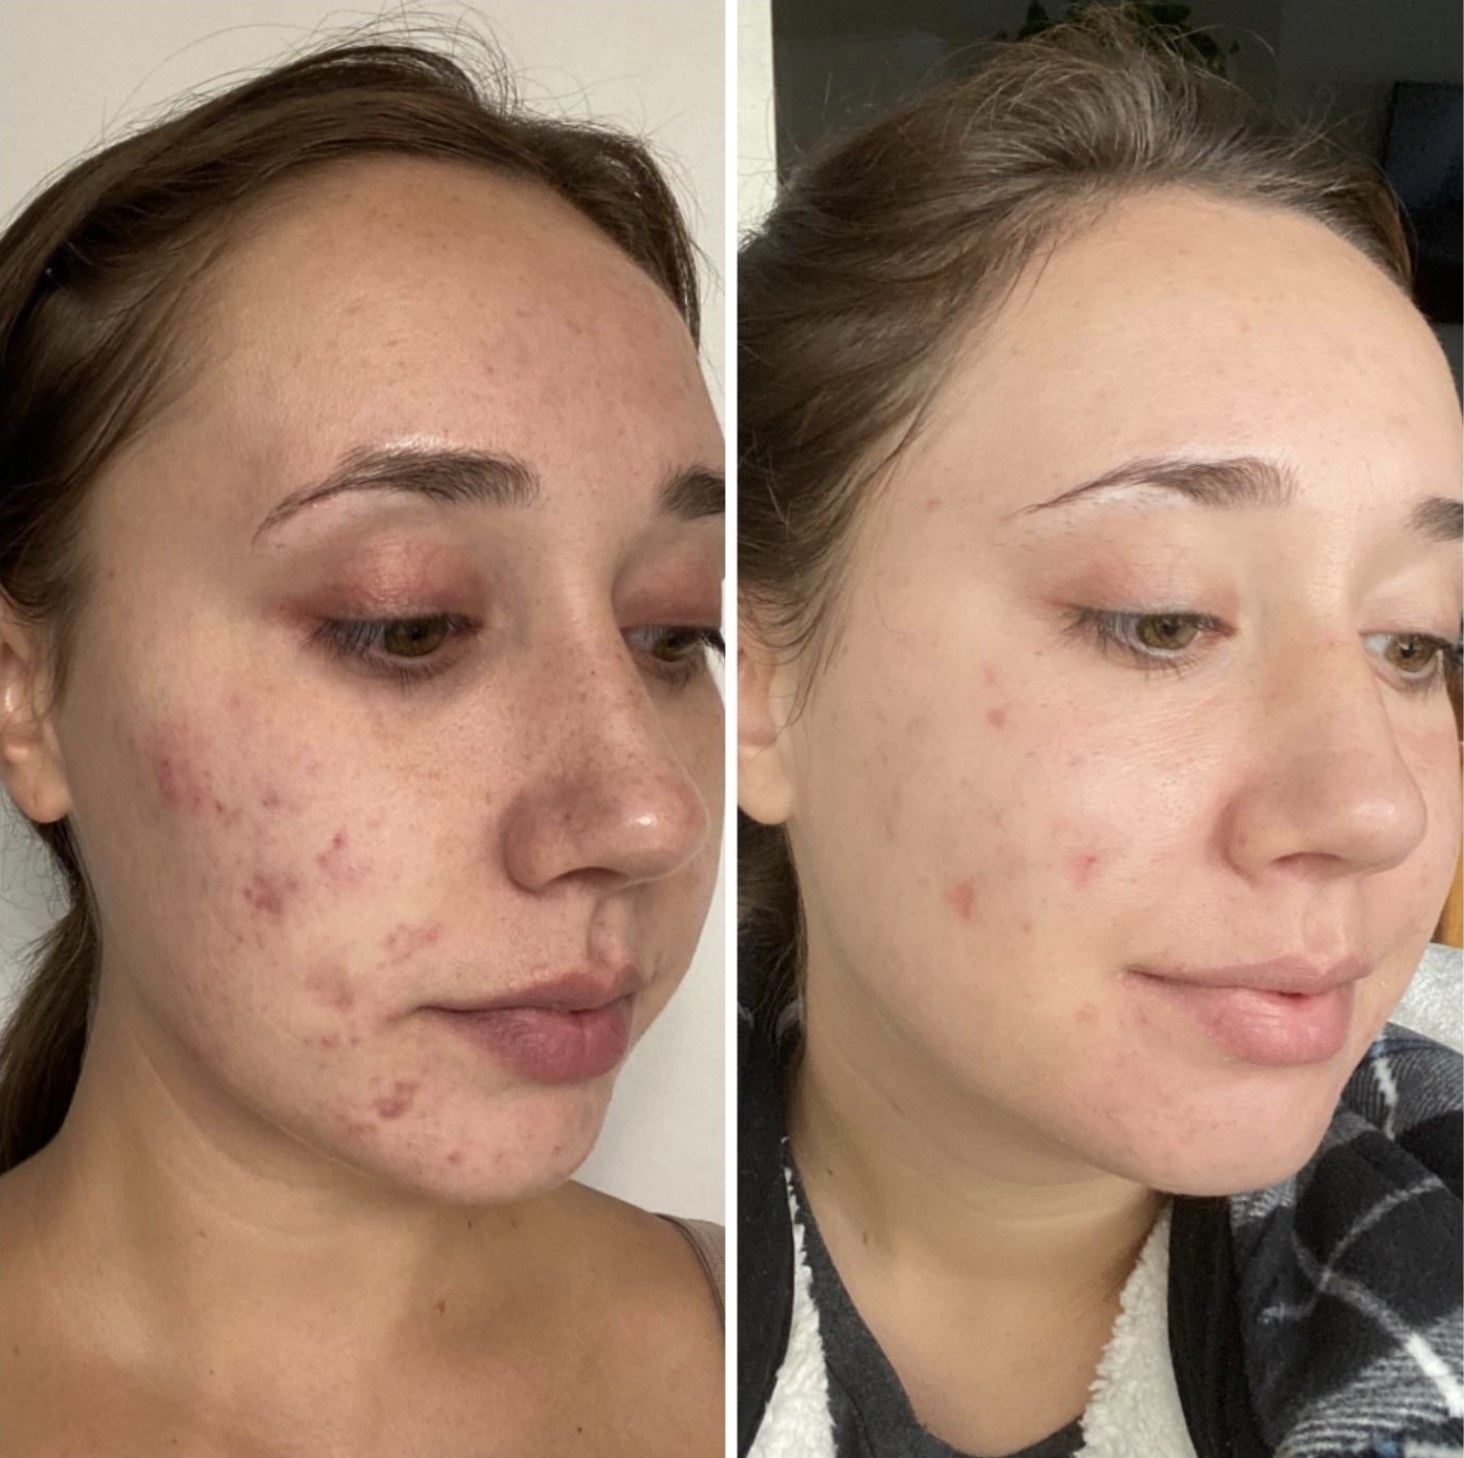 a before and after shot of a person using differing gel for acne